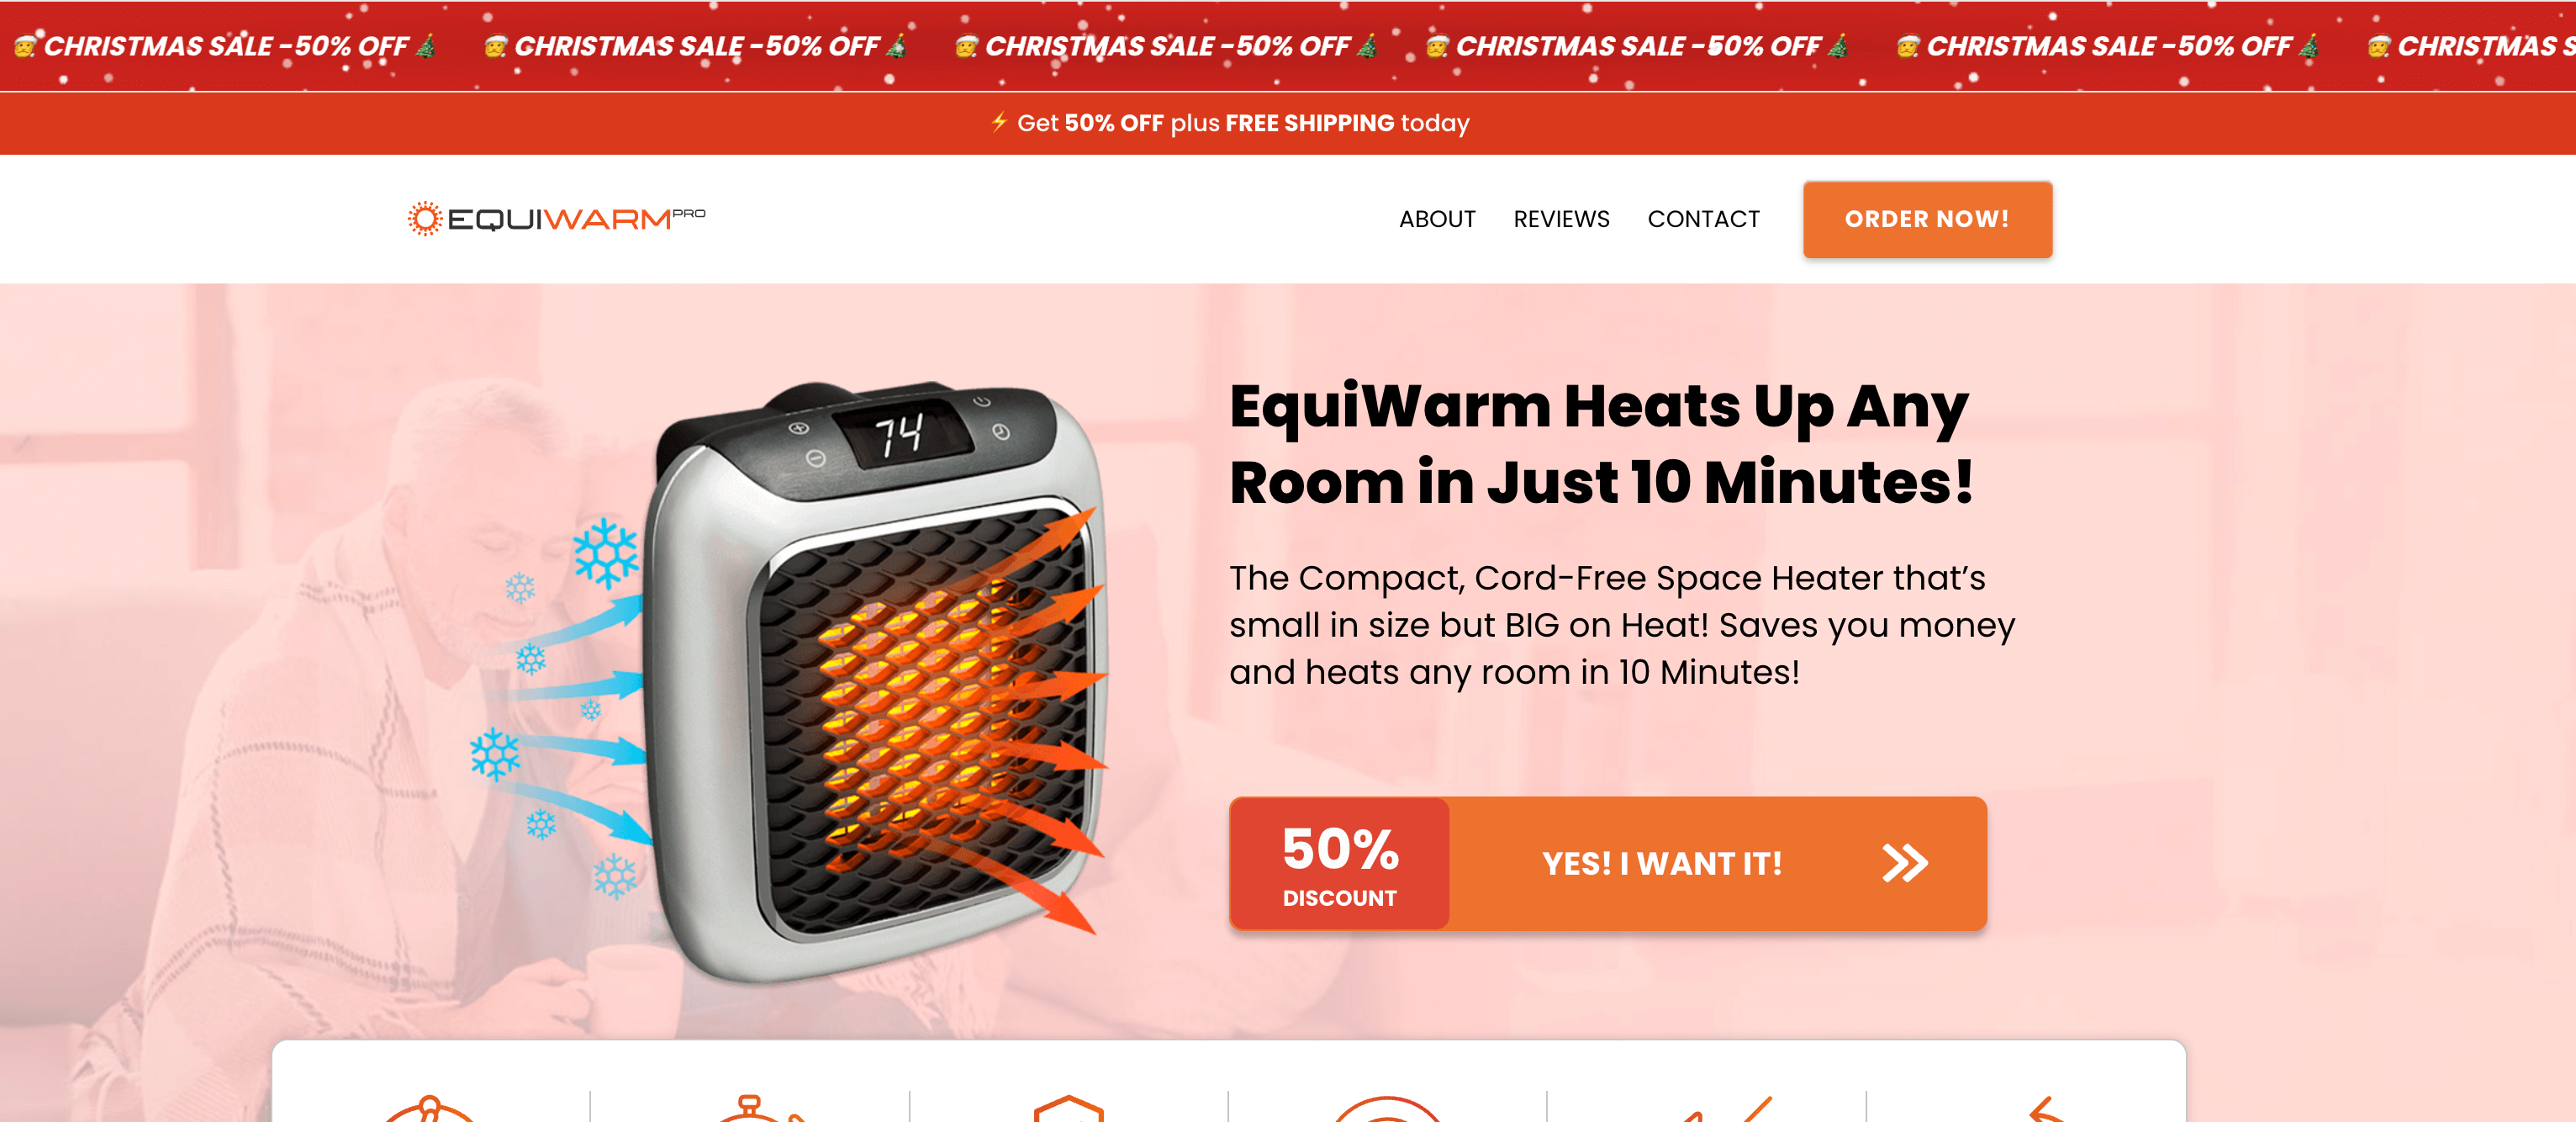 EquiWarm Pro Heater Review: Uncovering a Scam or a Legit Buy?